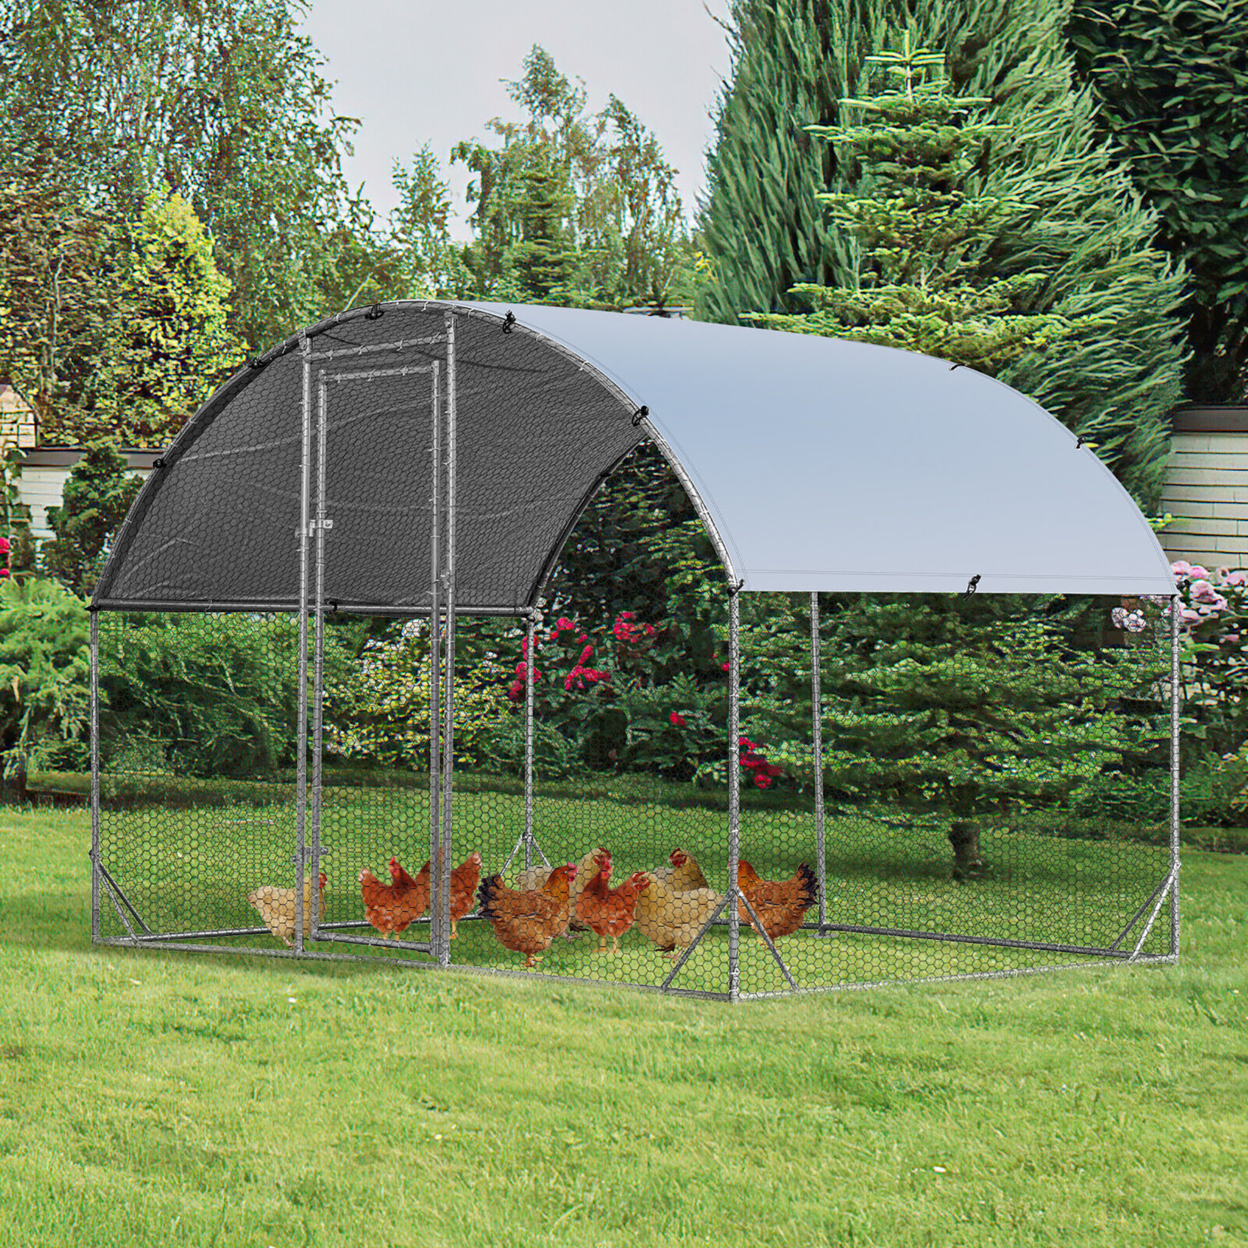 Large Metal Chicken Coop Outdoor Galvanized Dome Cage W/ Cover 9 Ft X 6.2 Ft